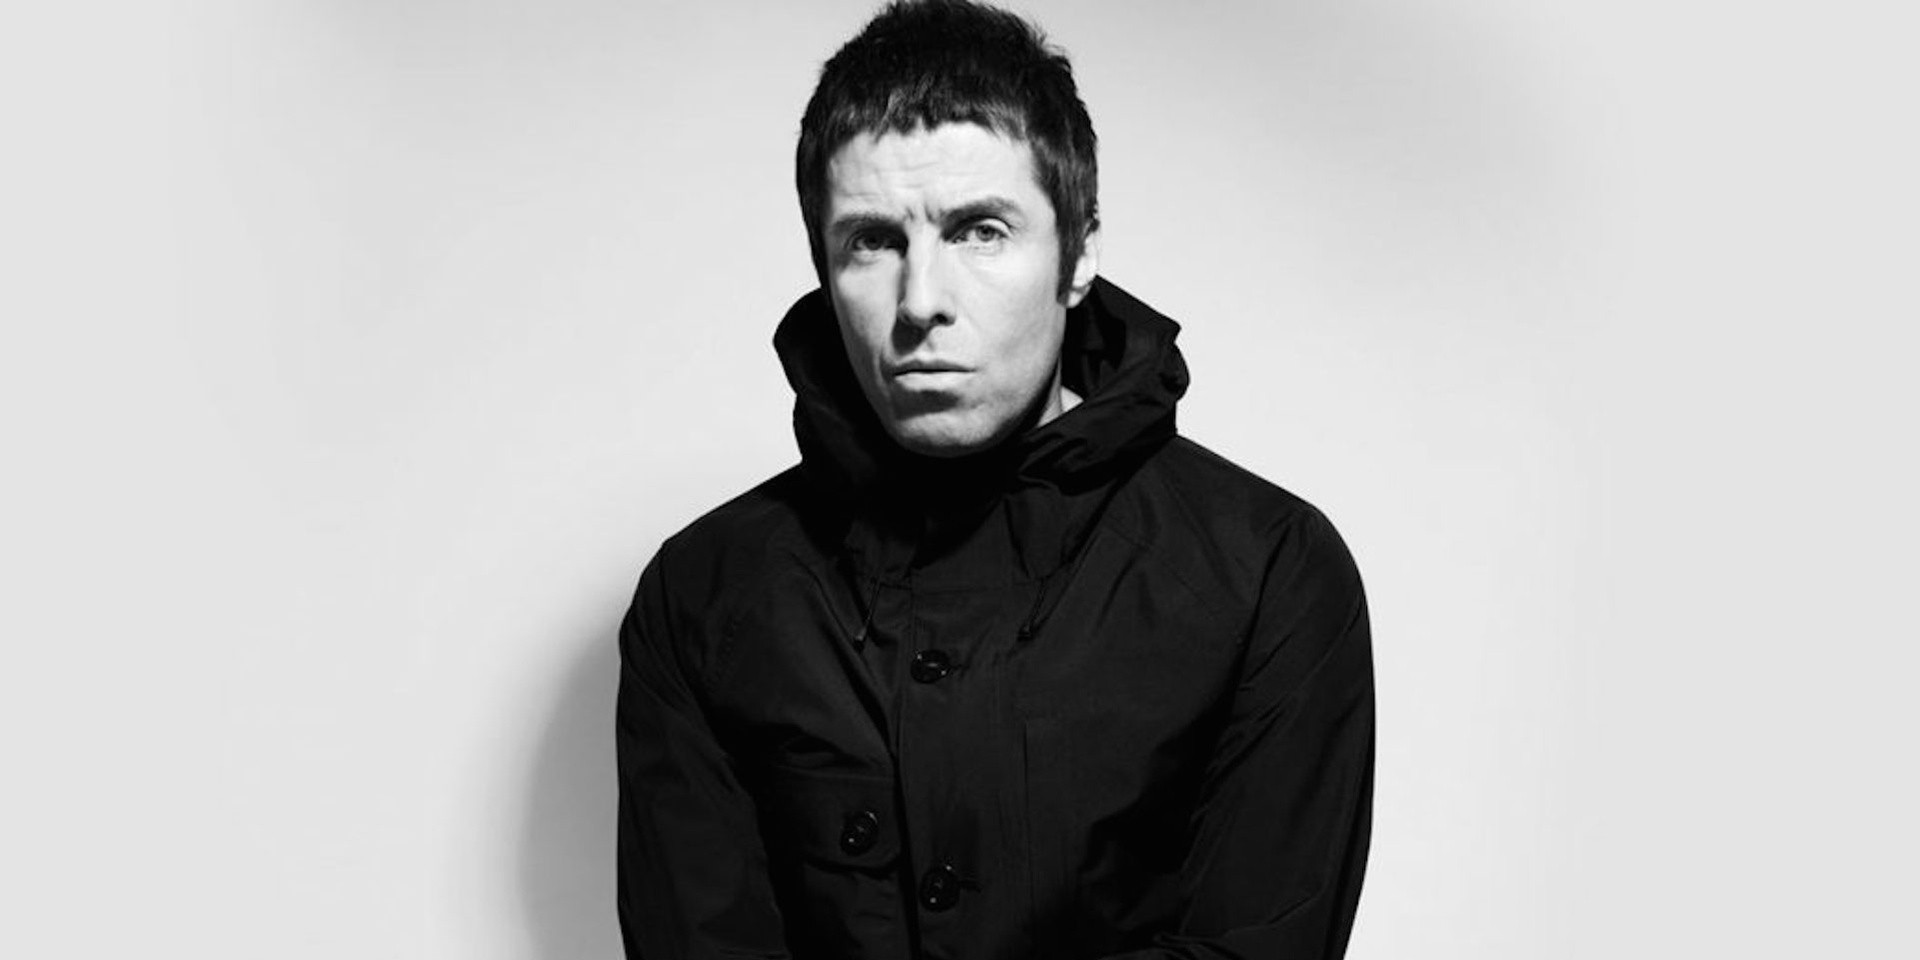 Liam Gallagher reveals title of upcoming album, previews next single